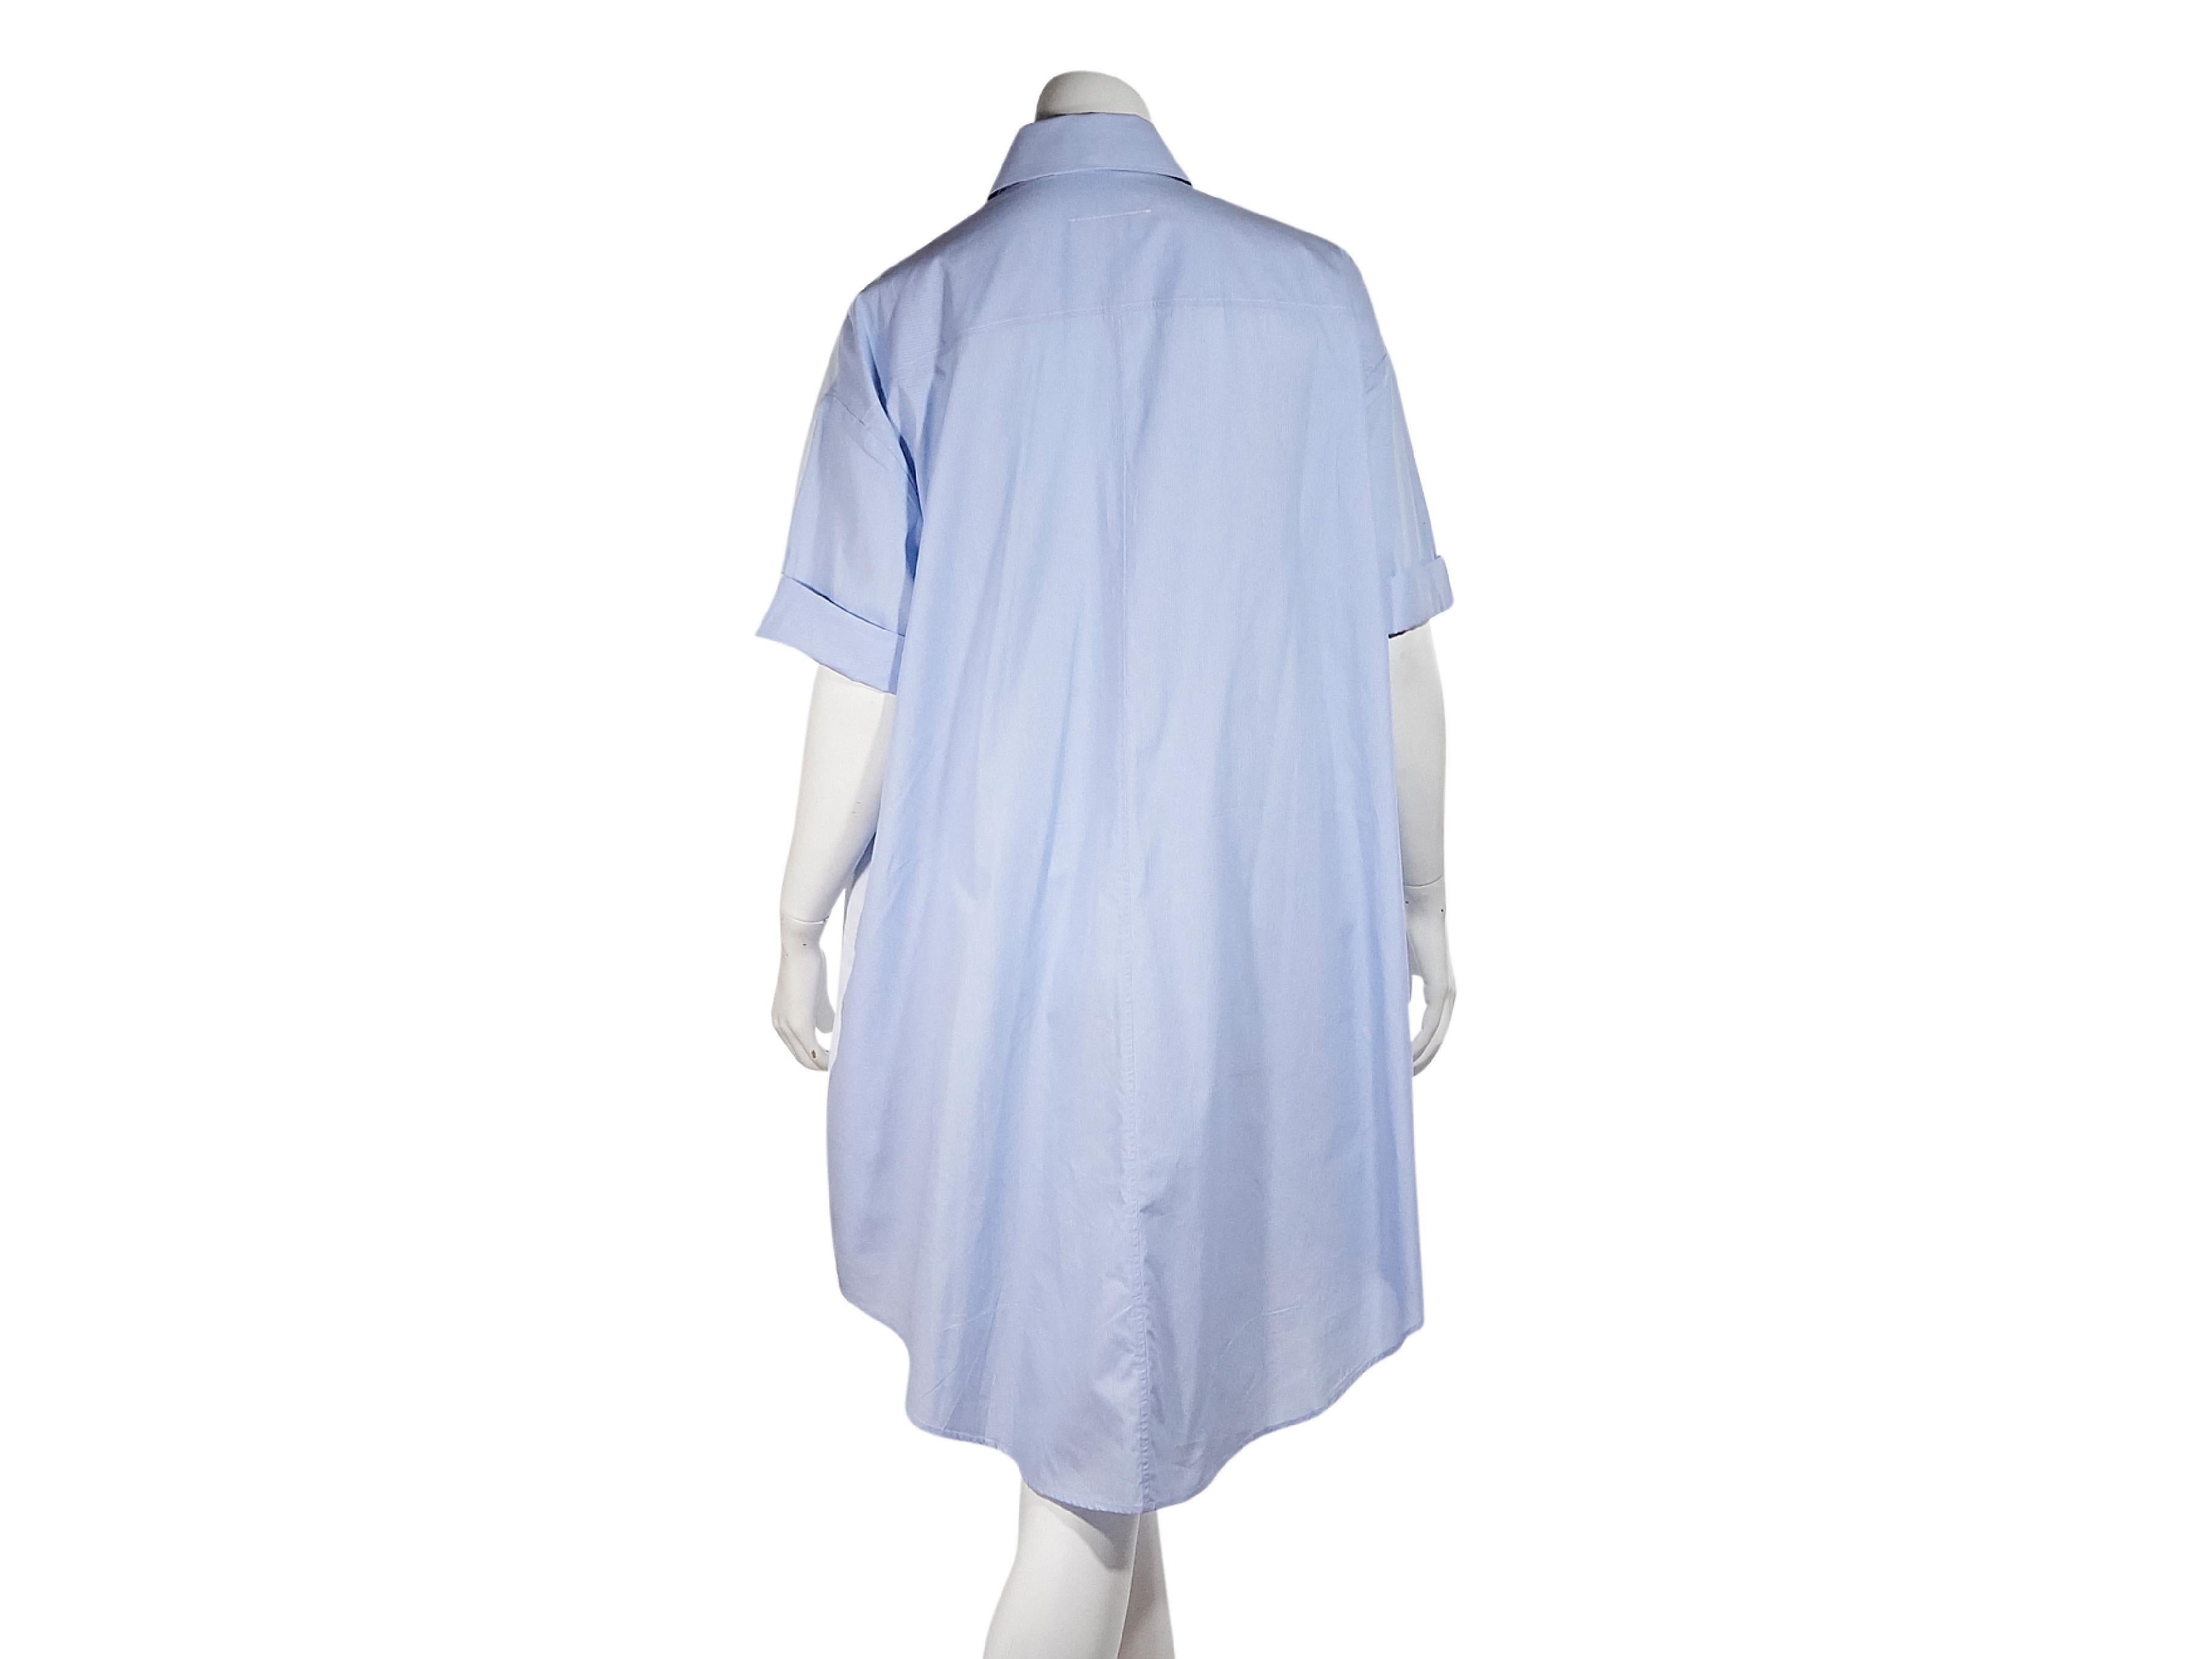 Product details:  Light blue oversized oxford shirtdress by MM6 Maison Margiela.  Point collar.  Short sleeves.  Button-front closure.  Shirttail hem.  32